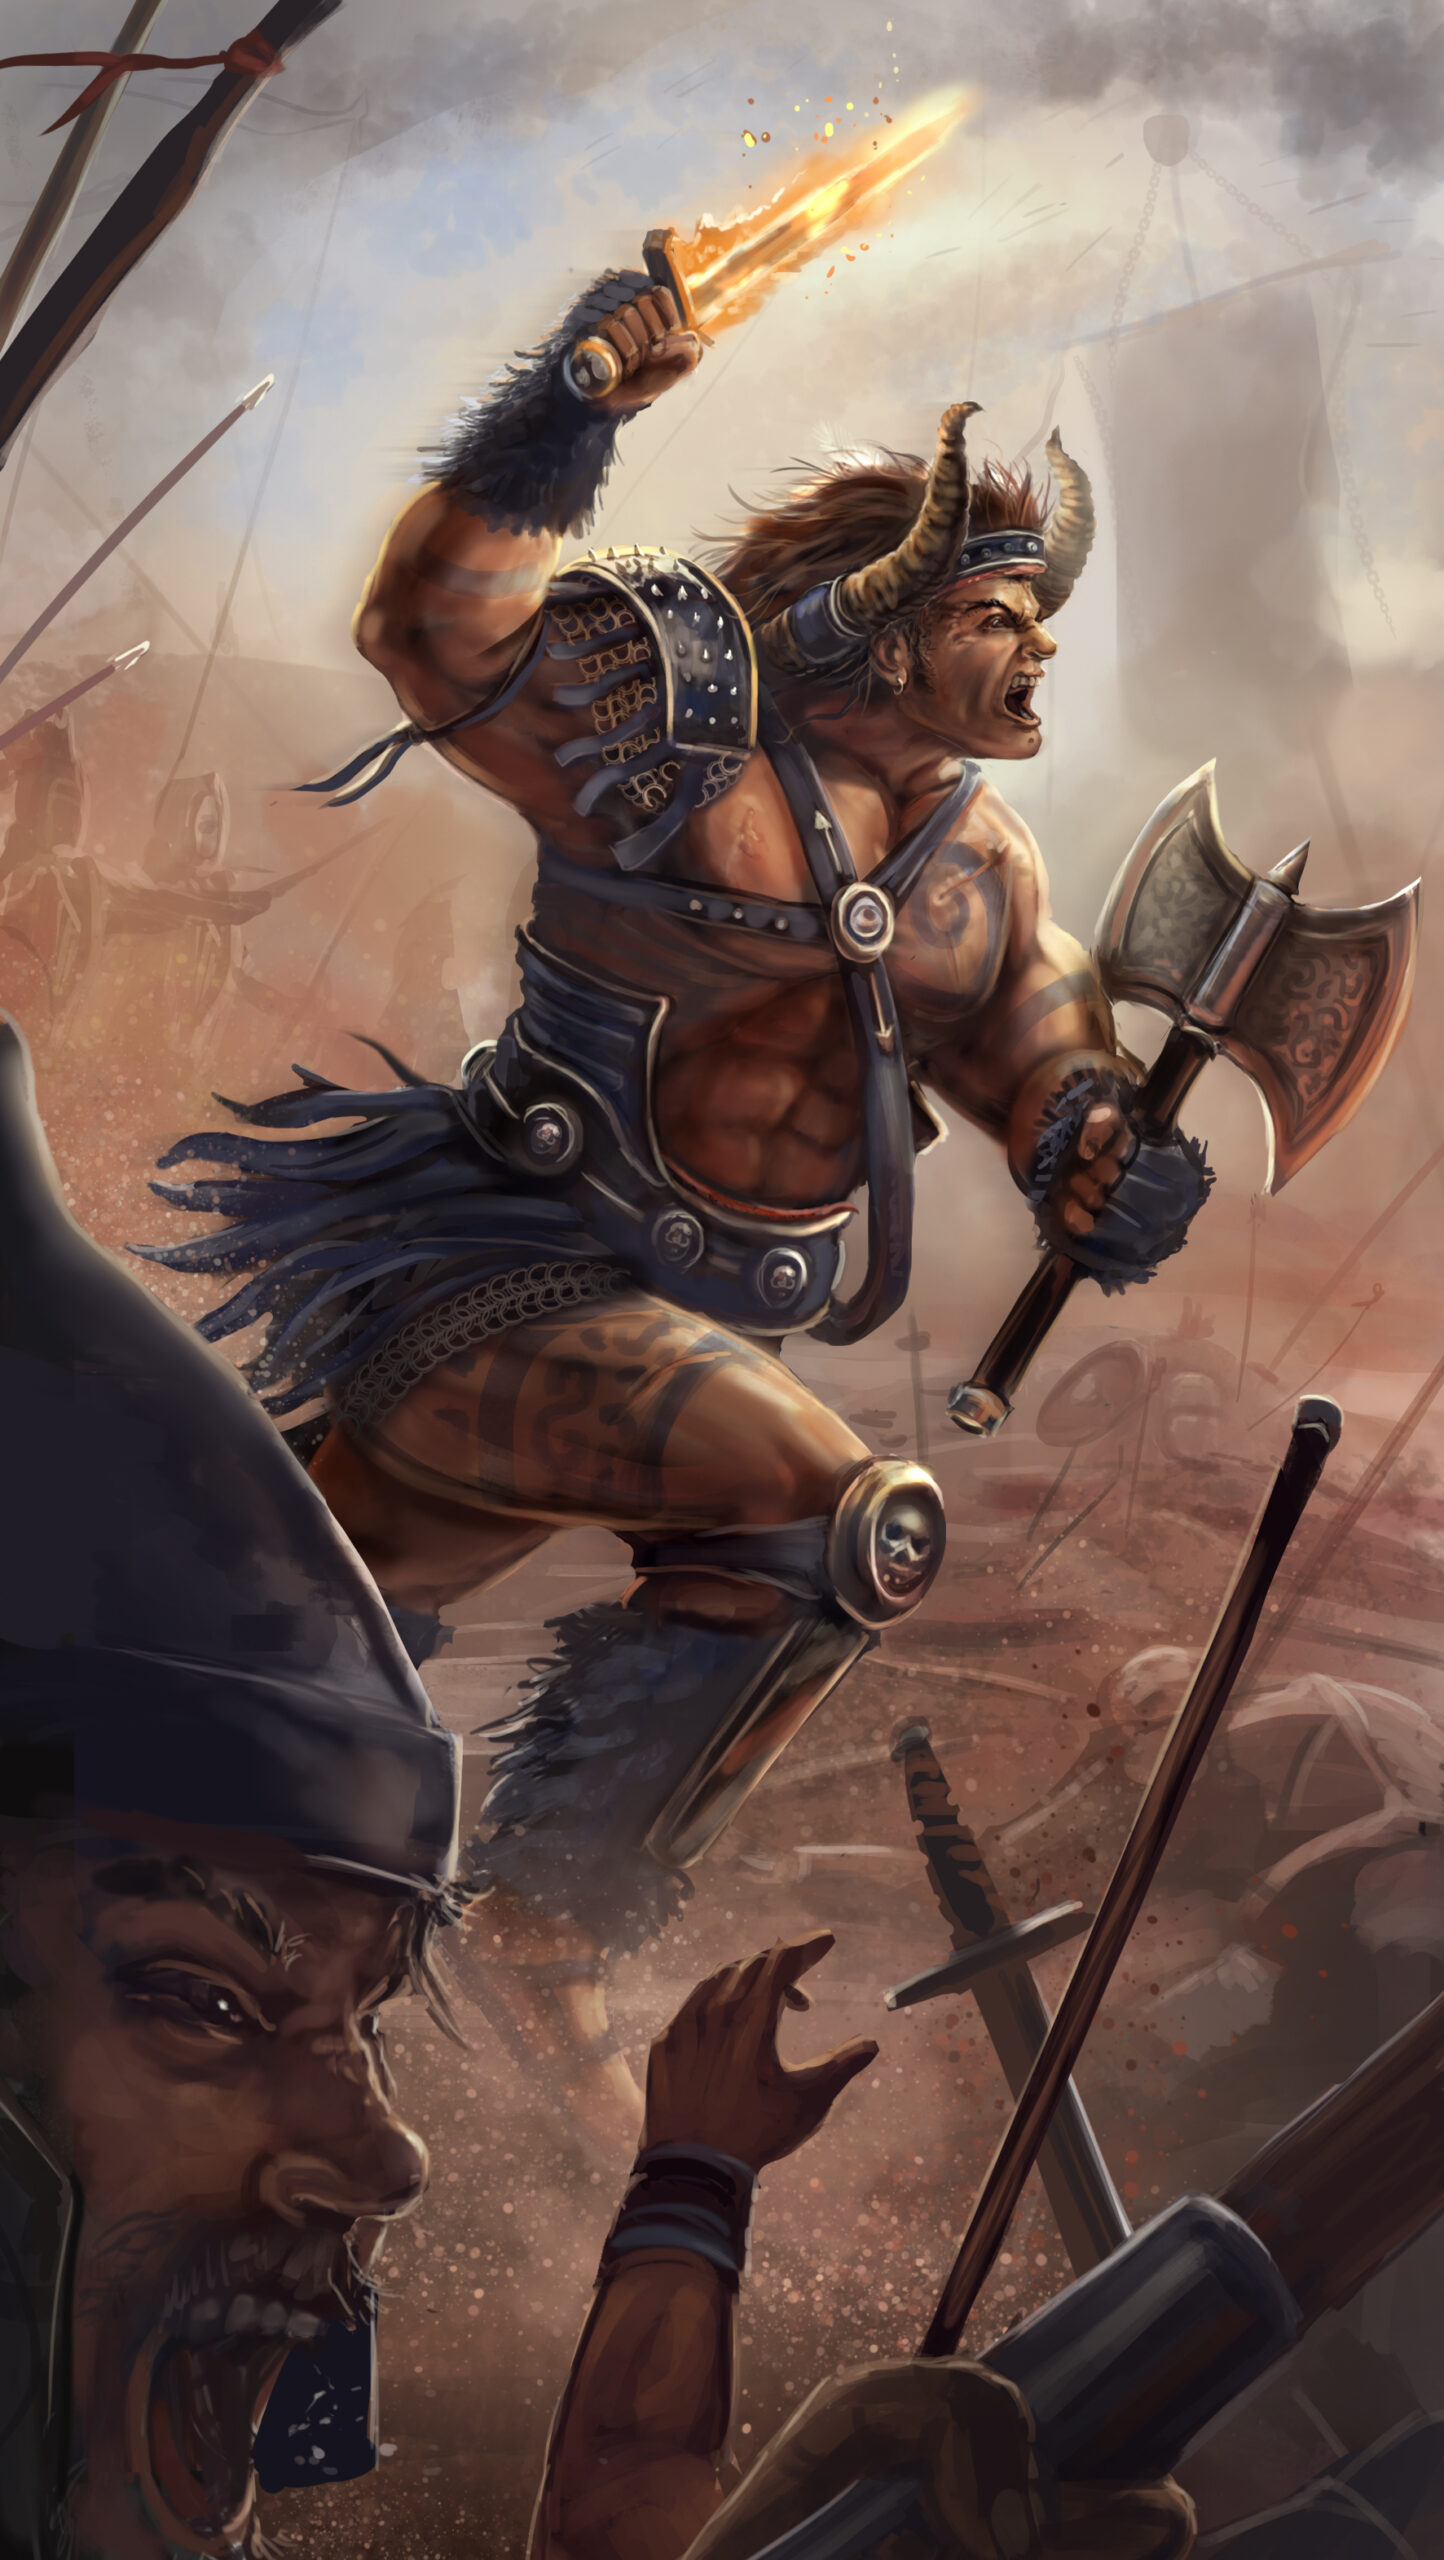 Barbarian art for the fantasy character, Warlord for a board game. Illustration by The Noble Artist